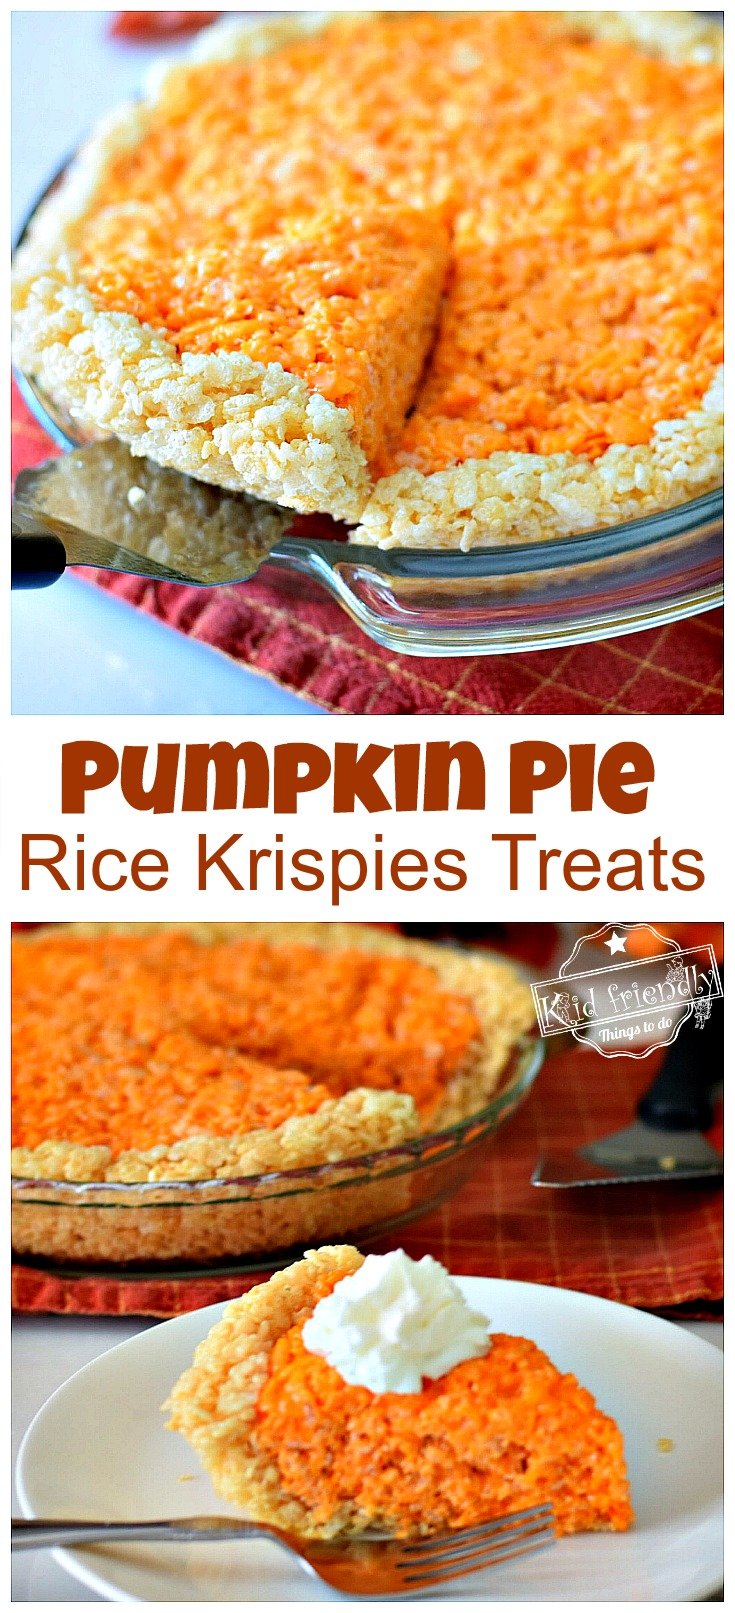 Make Fun and Easy Pumpkin Pie Rice Krispies Treats this Fall or Thanksgiving for the kids! Surprise everyone with this adorable dessert recipe. This is so much fun and delicious too! DIY - www.kidfriendlythingstodo.com